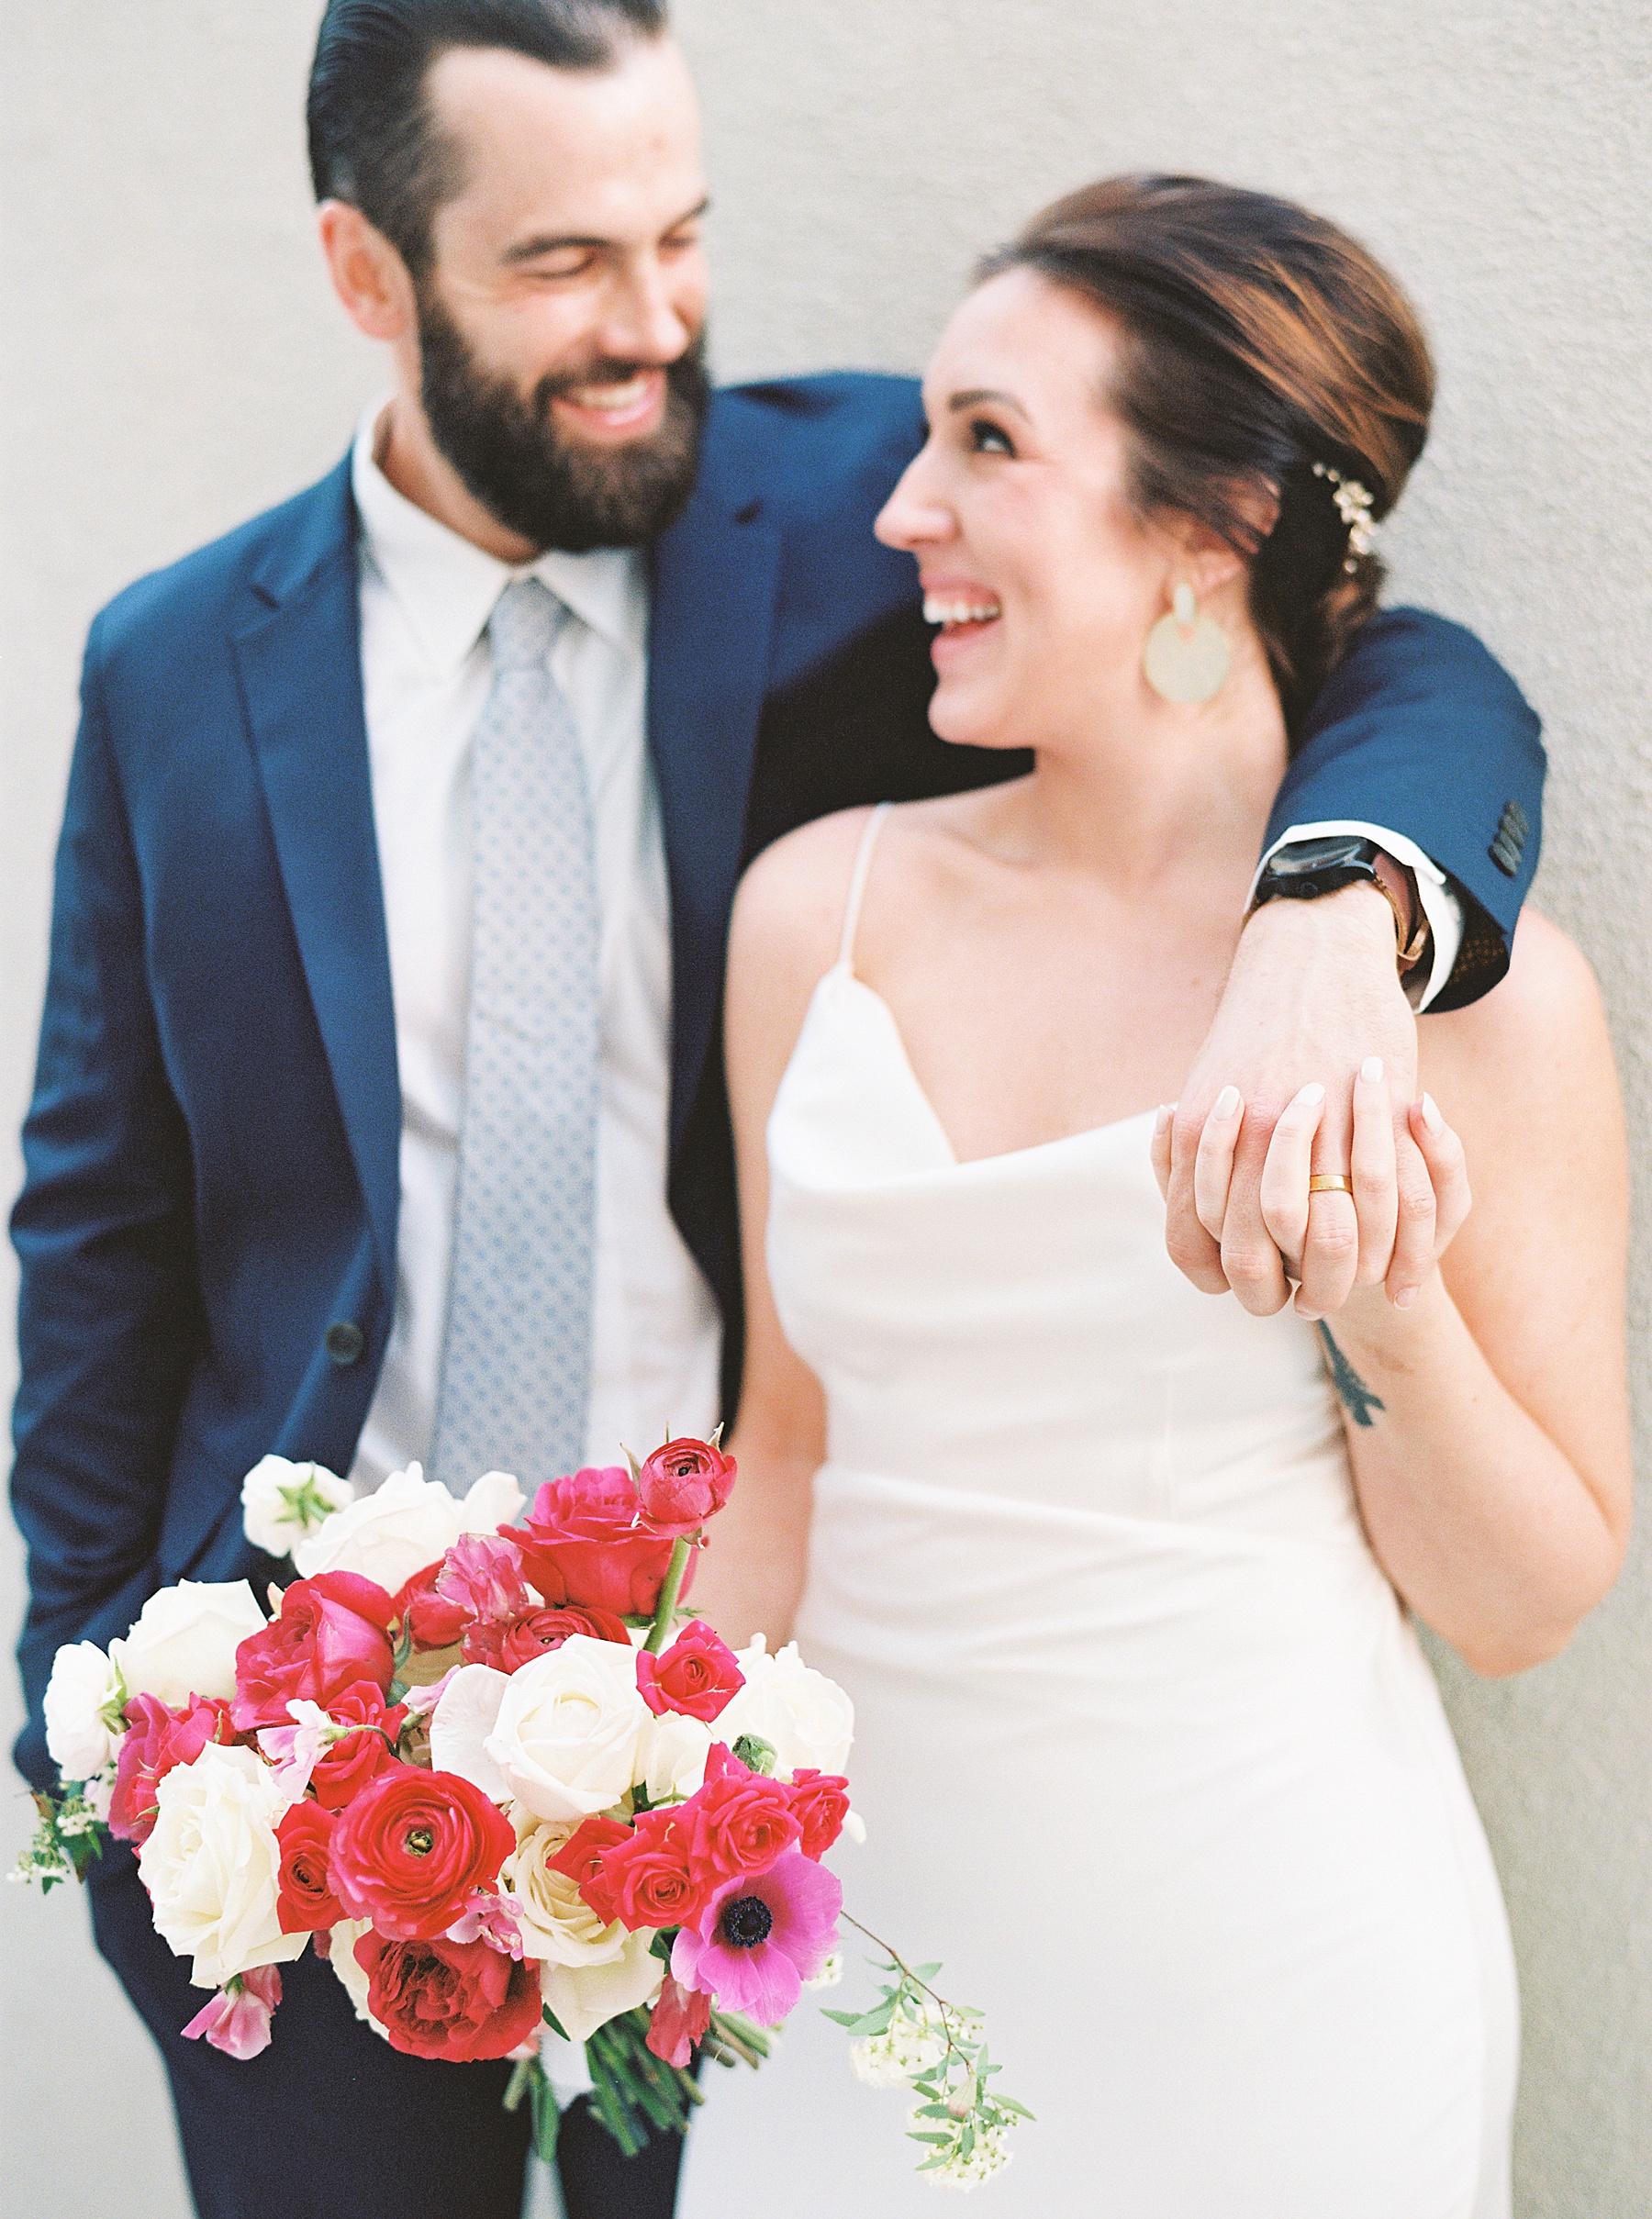 Grecian Inspired Micro-Wedding with Events by Kristina Elyse - Ash Baumgartner - Inspired by This - Sonoma Wedding Photographer_0022.jpg